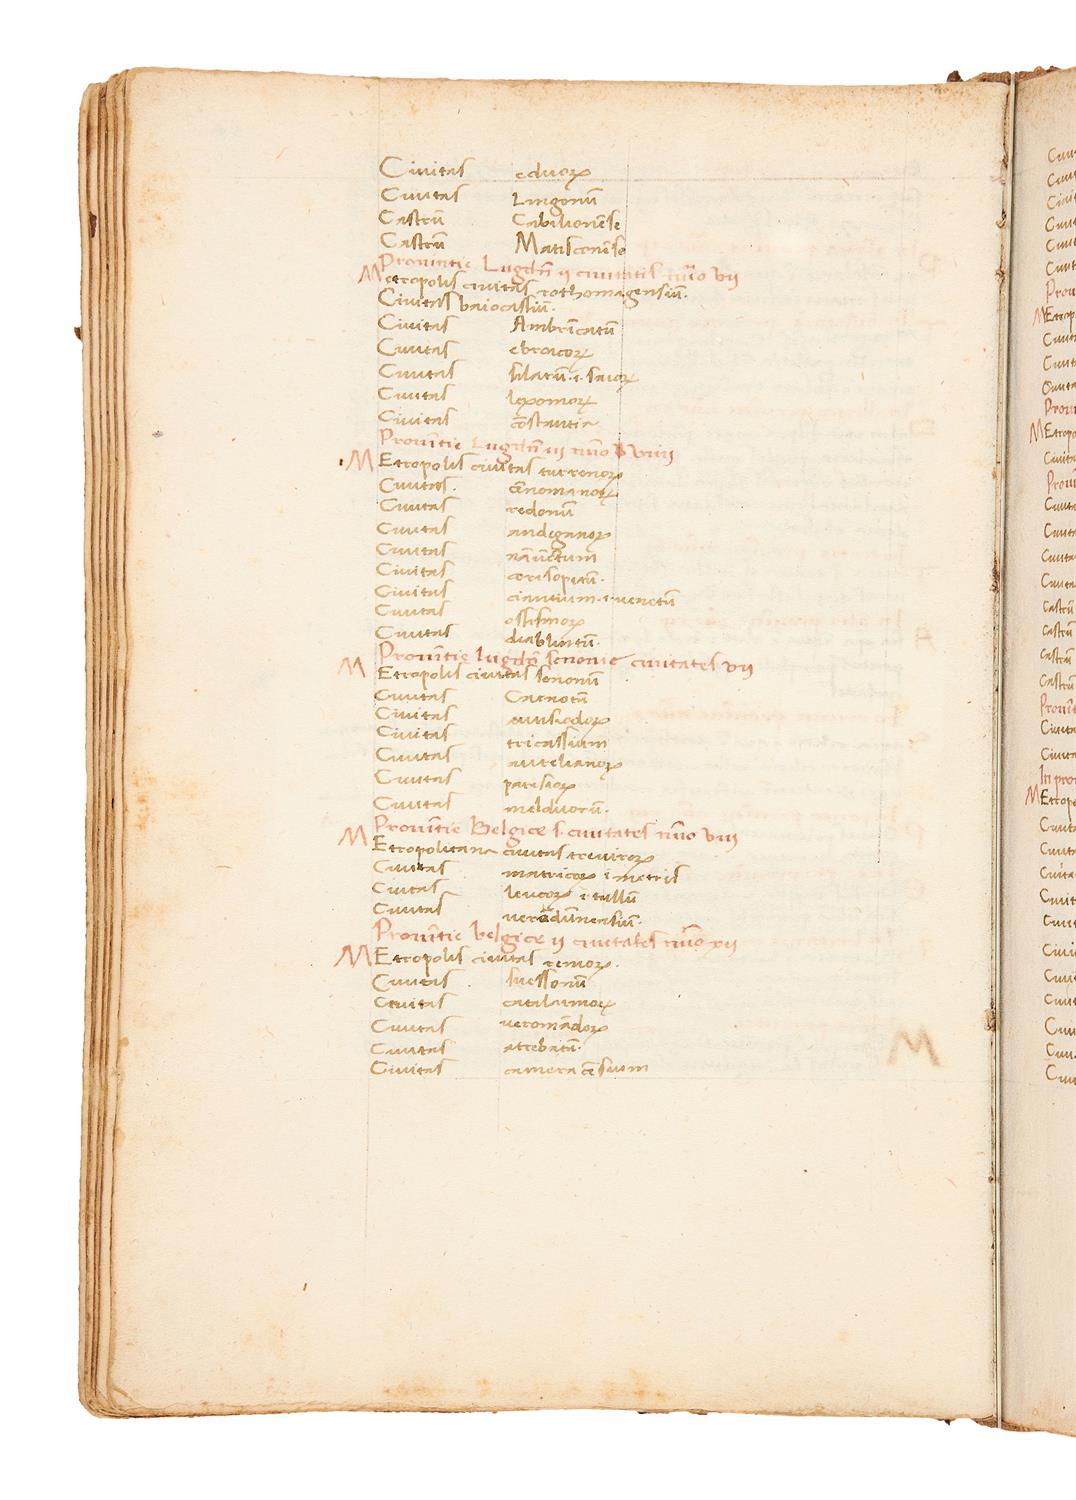 Geographical compendium with Vibius Sequester and other authors, manuscript on paper [Italy, c.1477] - Image 4 of 6